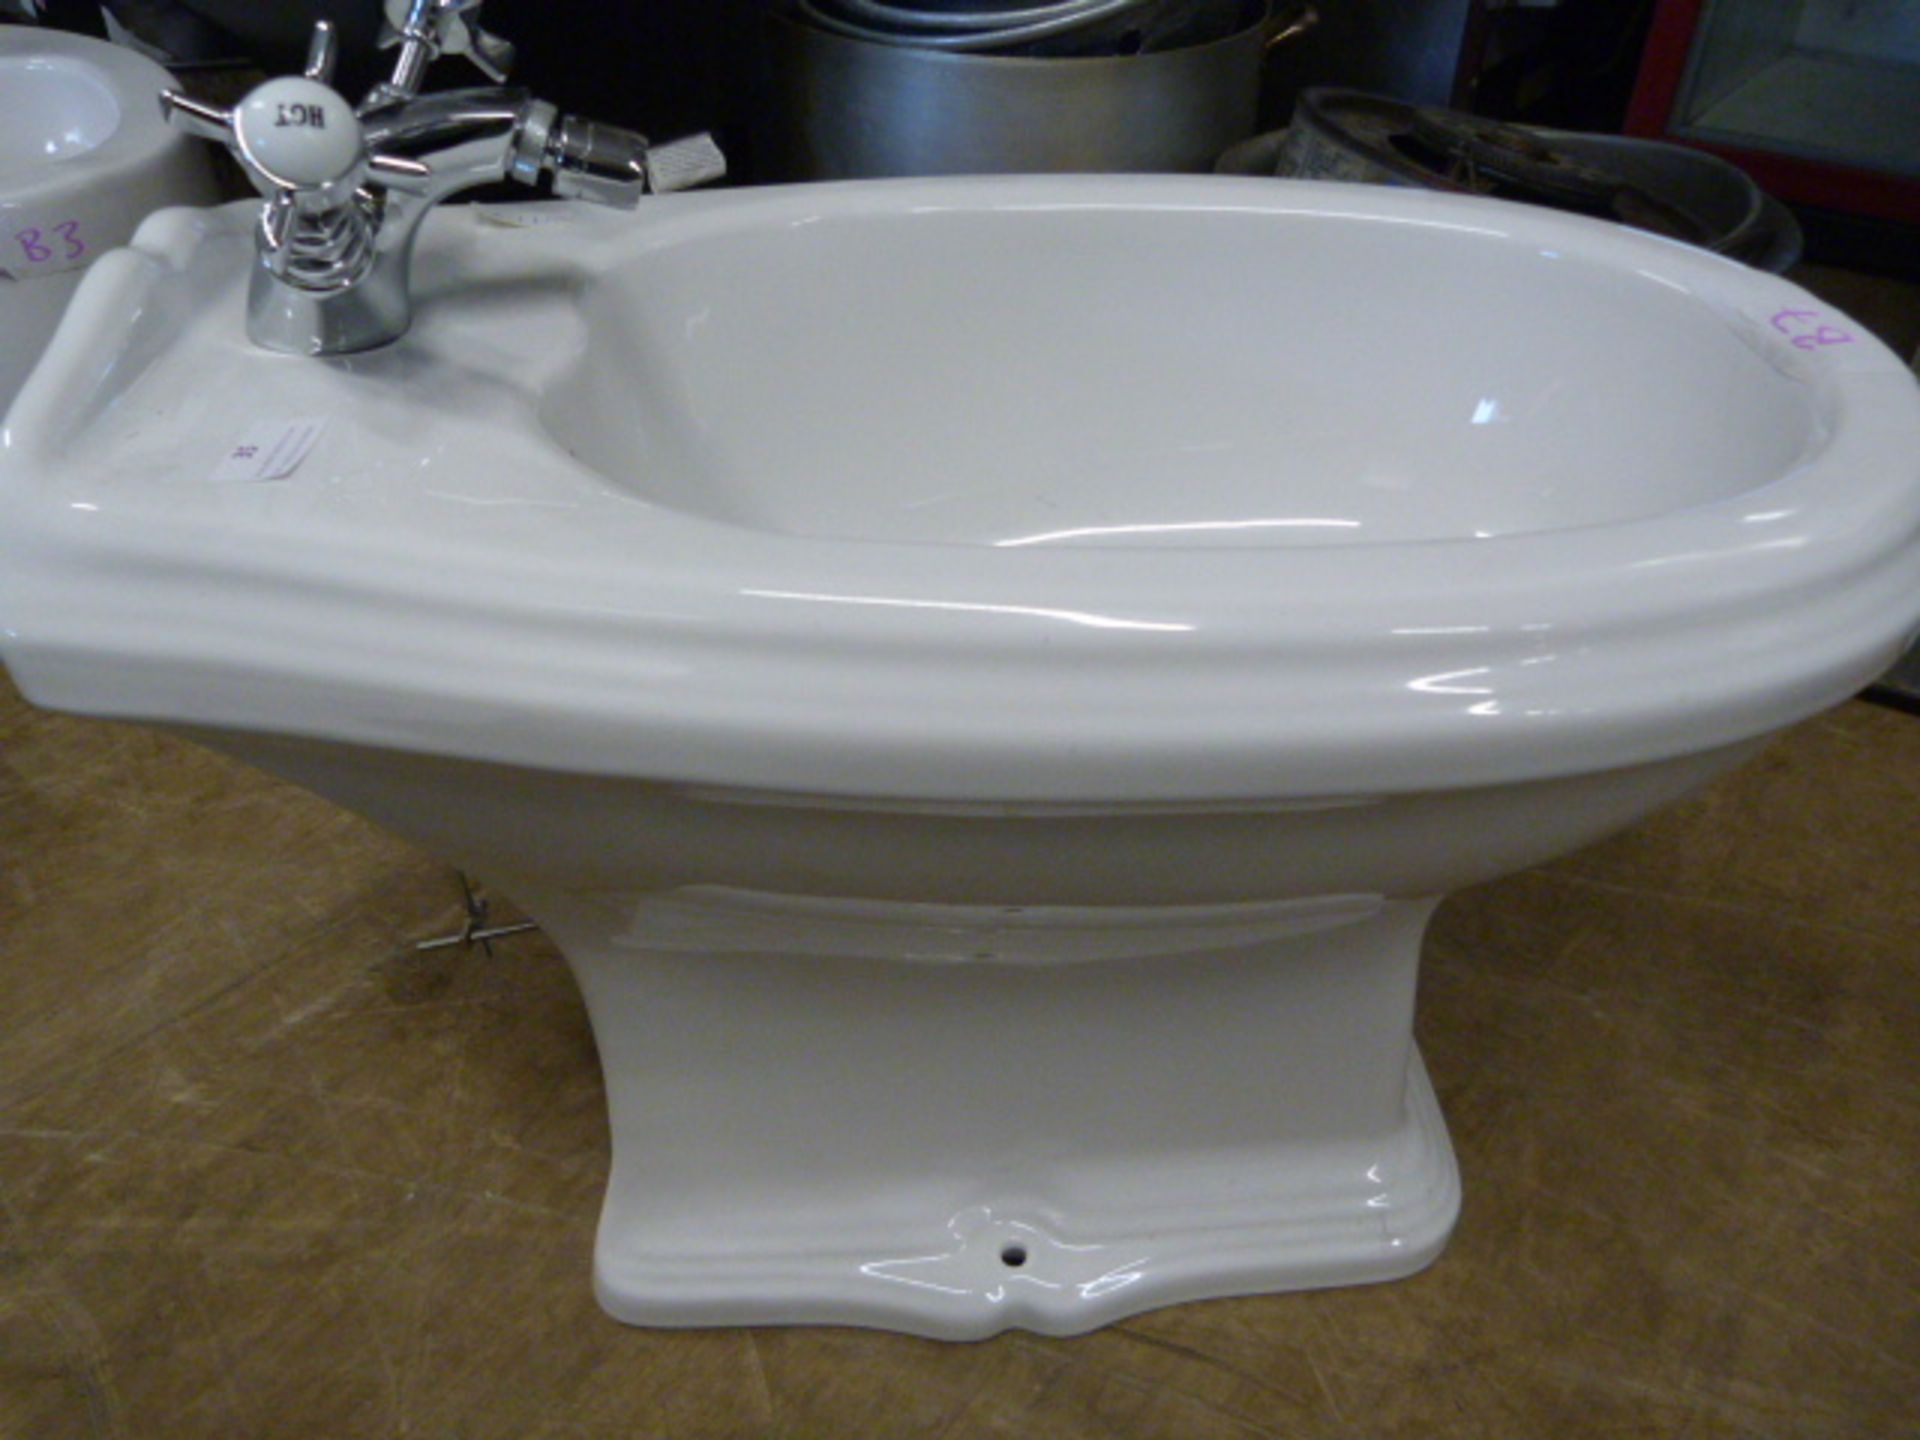 *Oval Floor Mounted White Ceramic Bidet with Victo